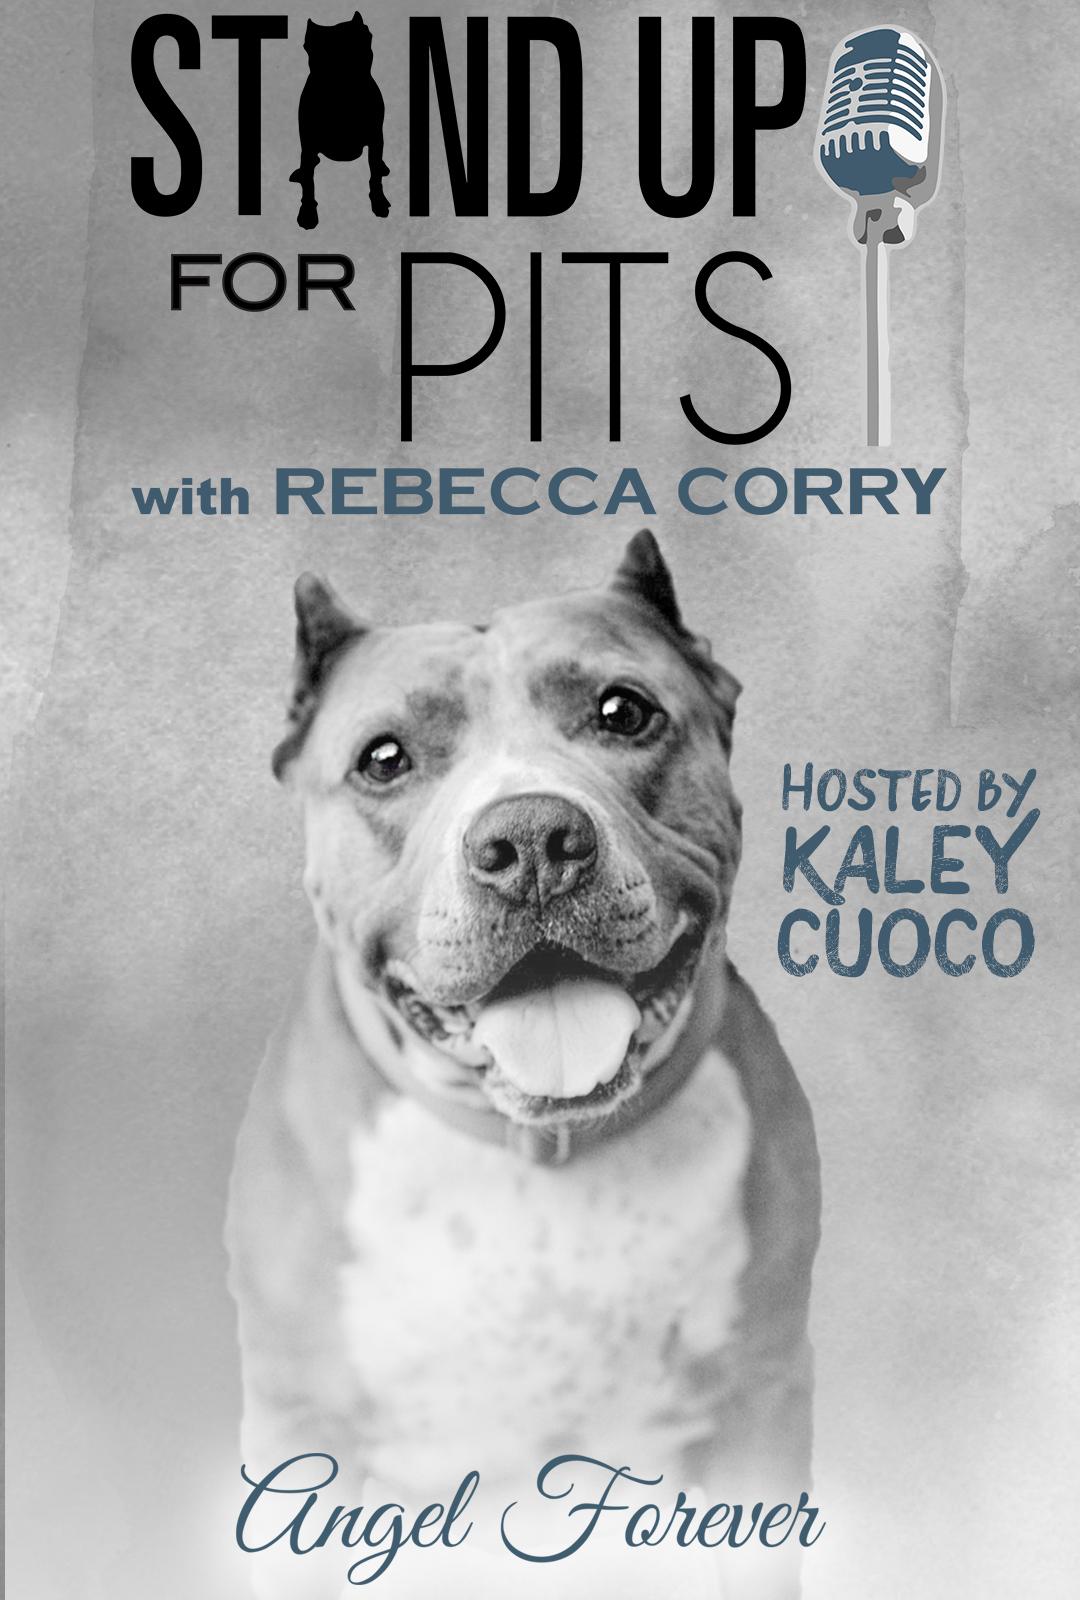 STAND UP FOR PITS COMEDY SPECIAL AVAILABLE NOW!!!